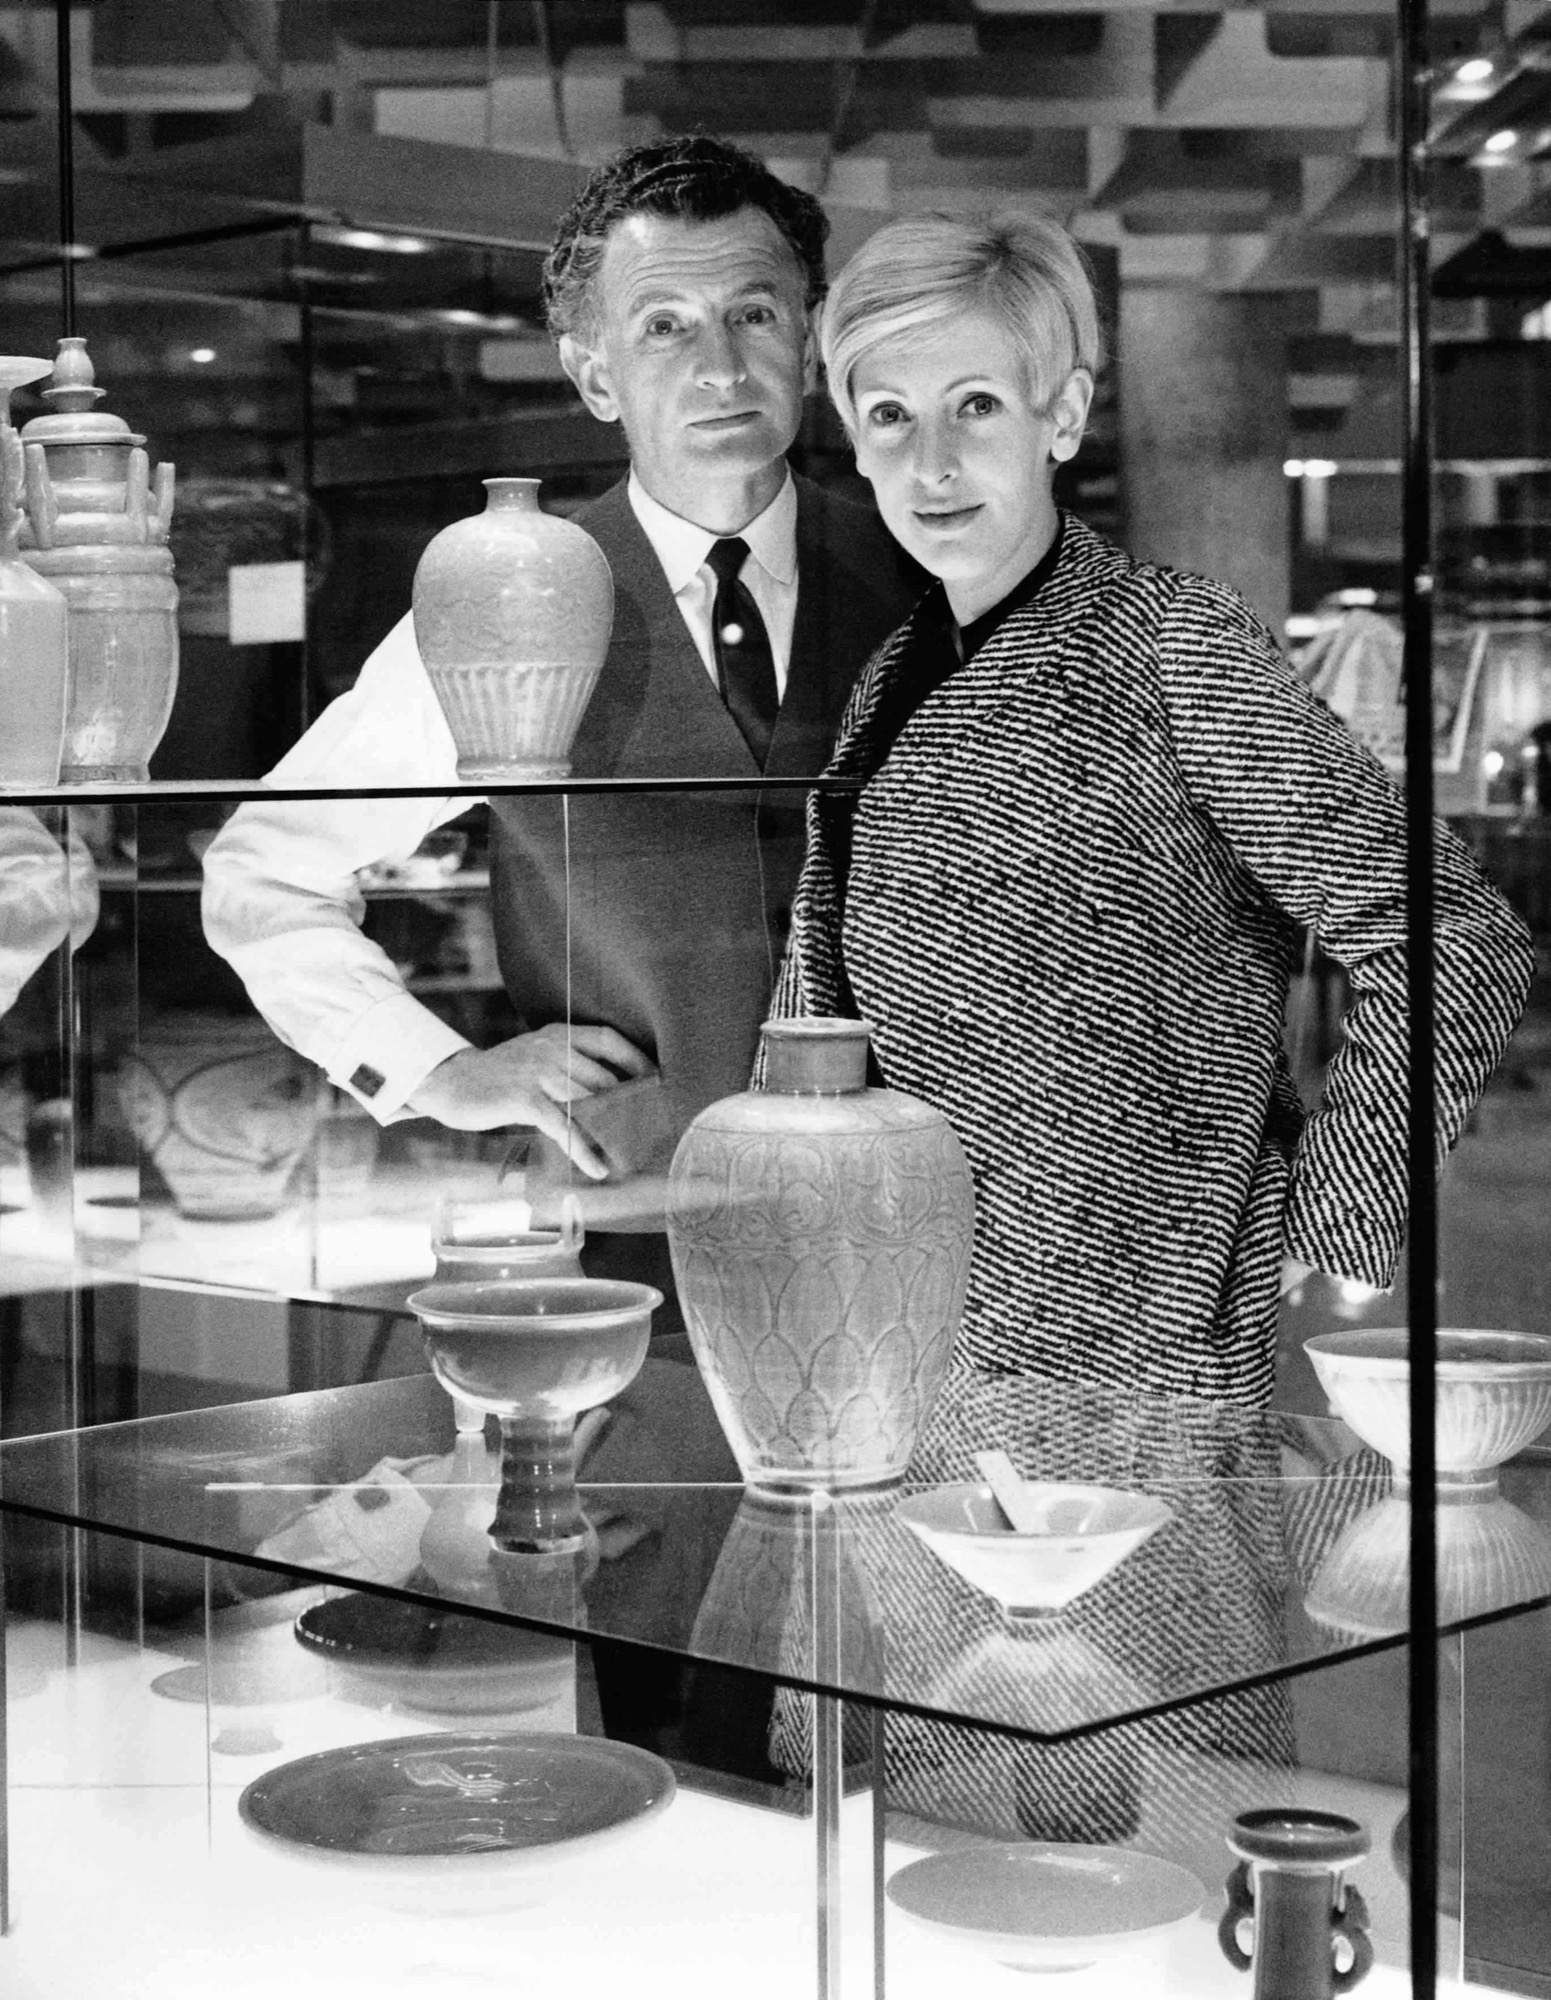 Grant Featherston and Mary Featherston in the National Gallery of Victoria’s Oriental Gallery, 1968. Photograph: Mark Strizic, Featherston Archive, National Gallery of Victoria. © Estate of Mark Strizic.